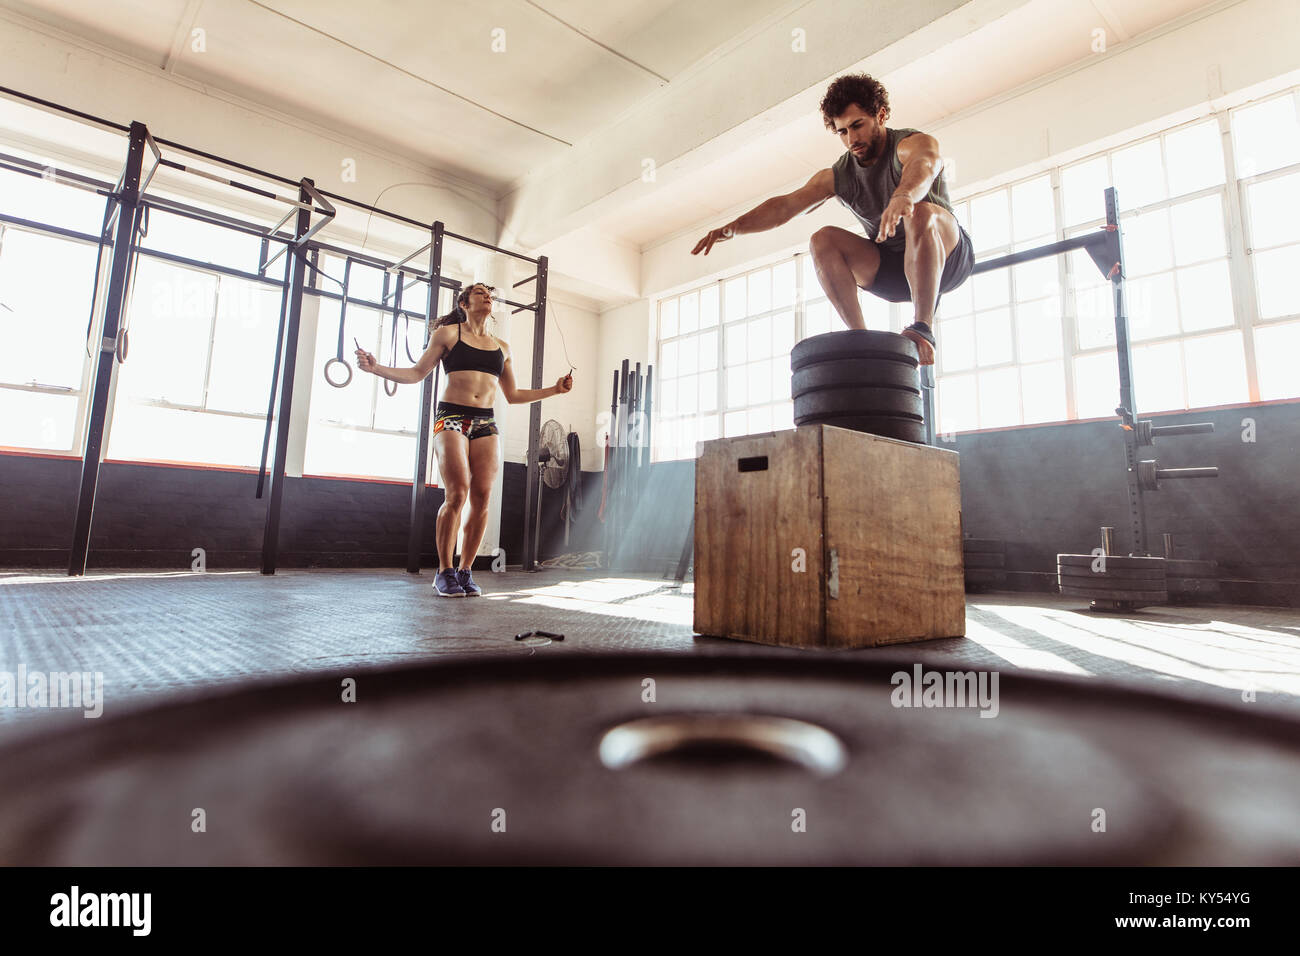 Fit young man box jumping with woman exercising with skipping ropes at a cross training style gym. Couple during intense workout session at health clu Stock Photo